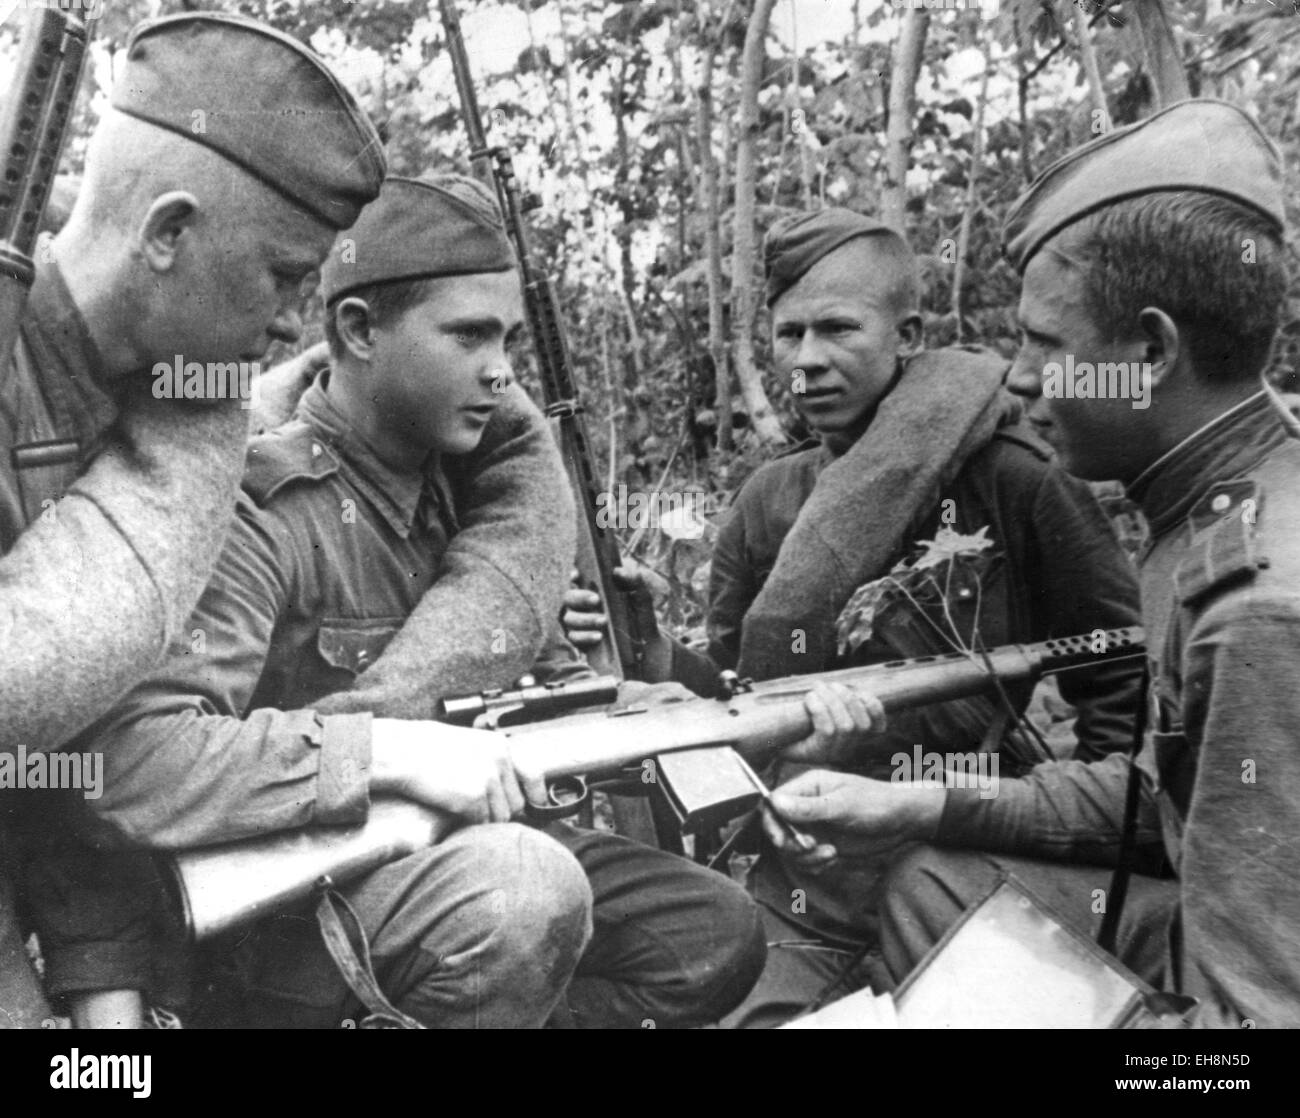 SOVIET ARMY snipers in training with instructor Sgt.Major Cheremisin at right about 1943. Rifle appears to be a late model  SVT-38 with telescopic sight Stock Photo